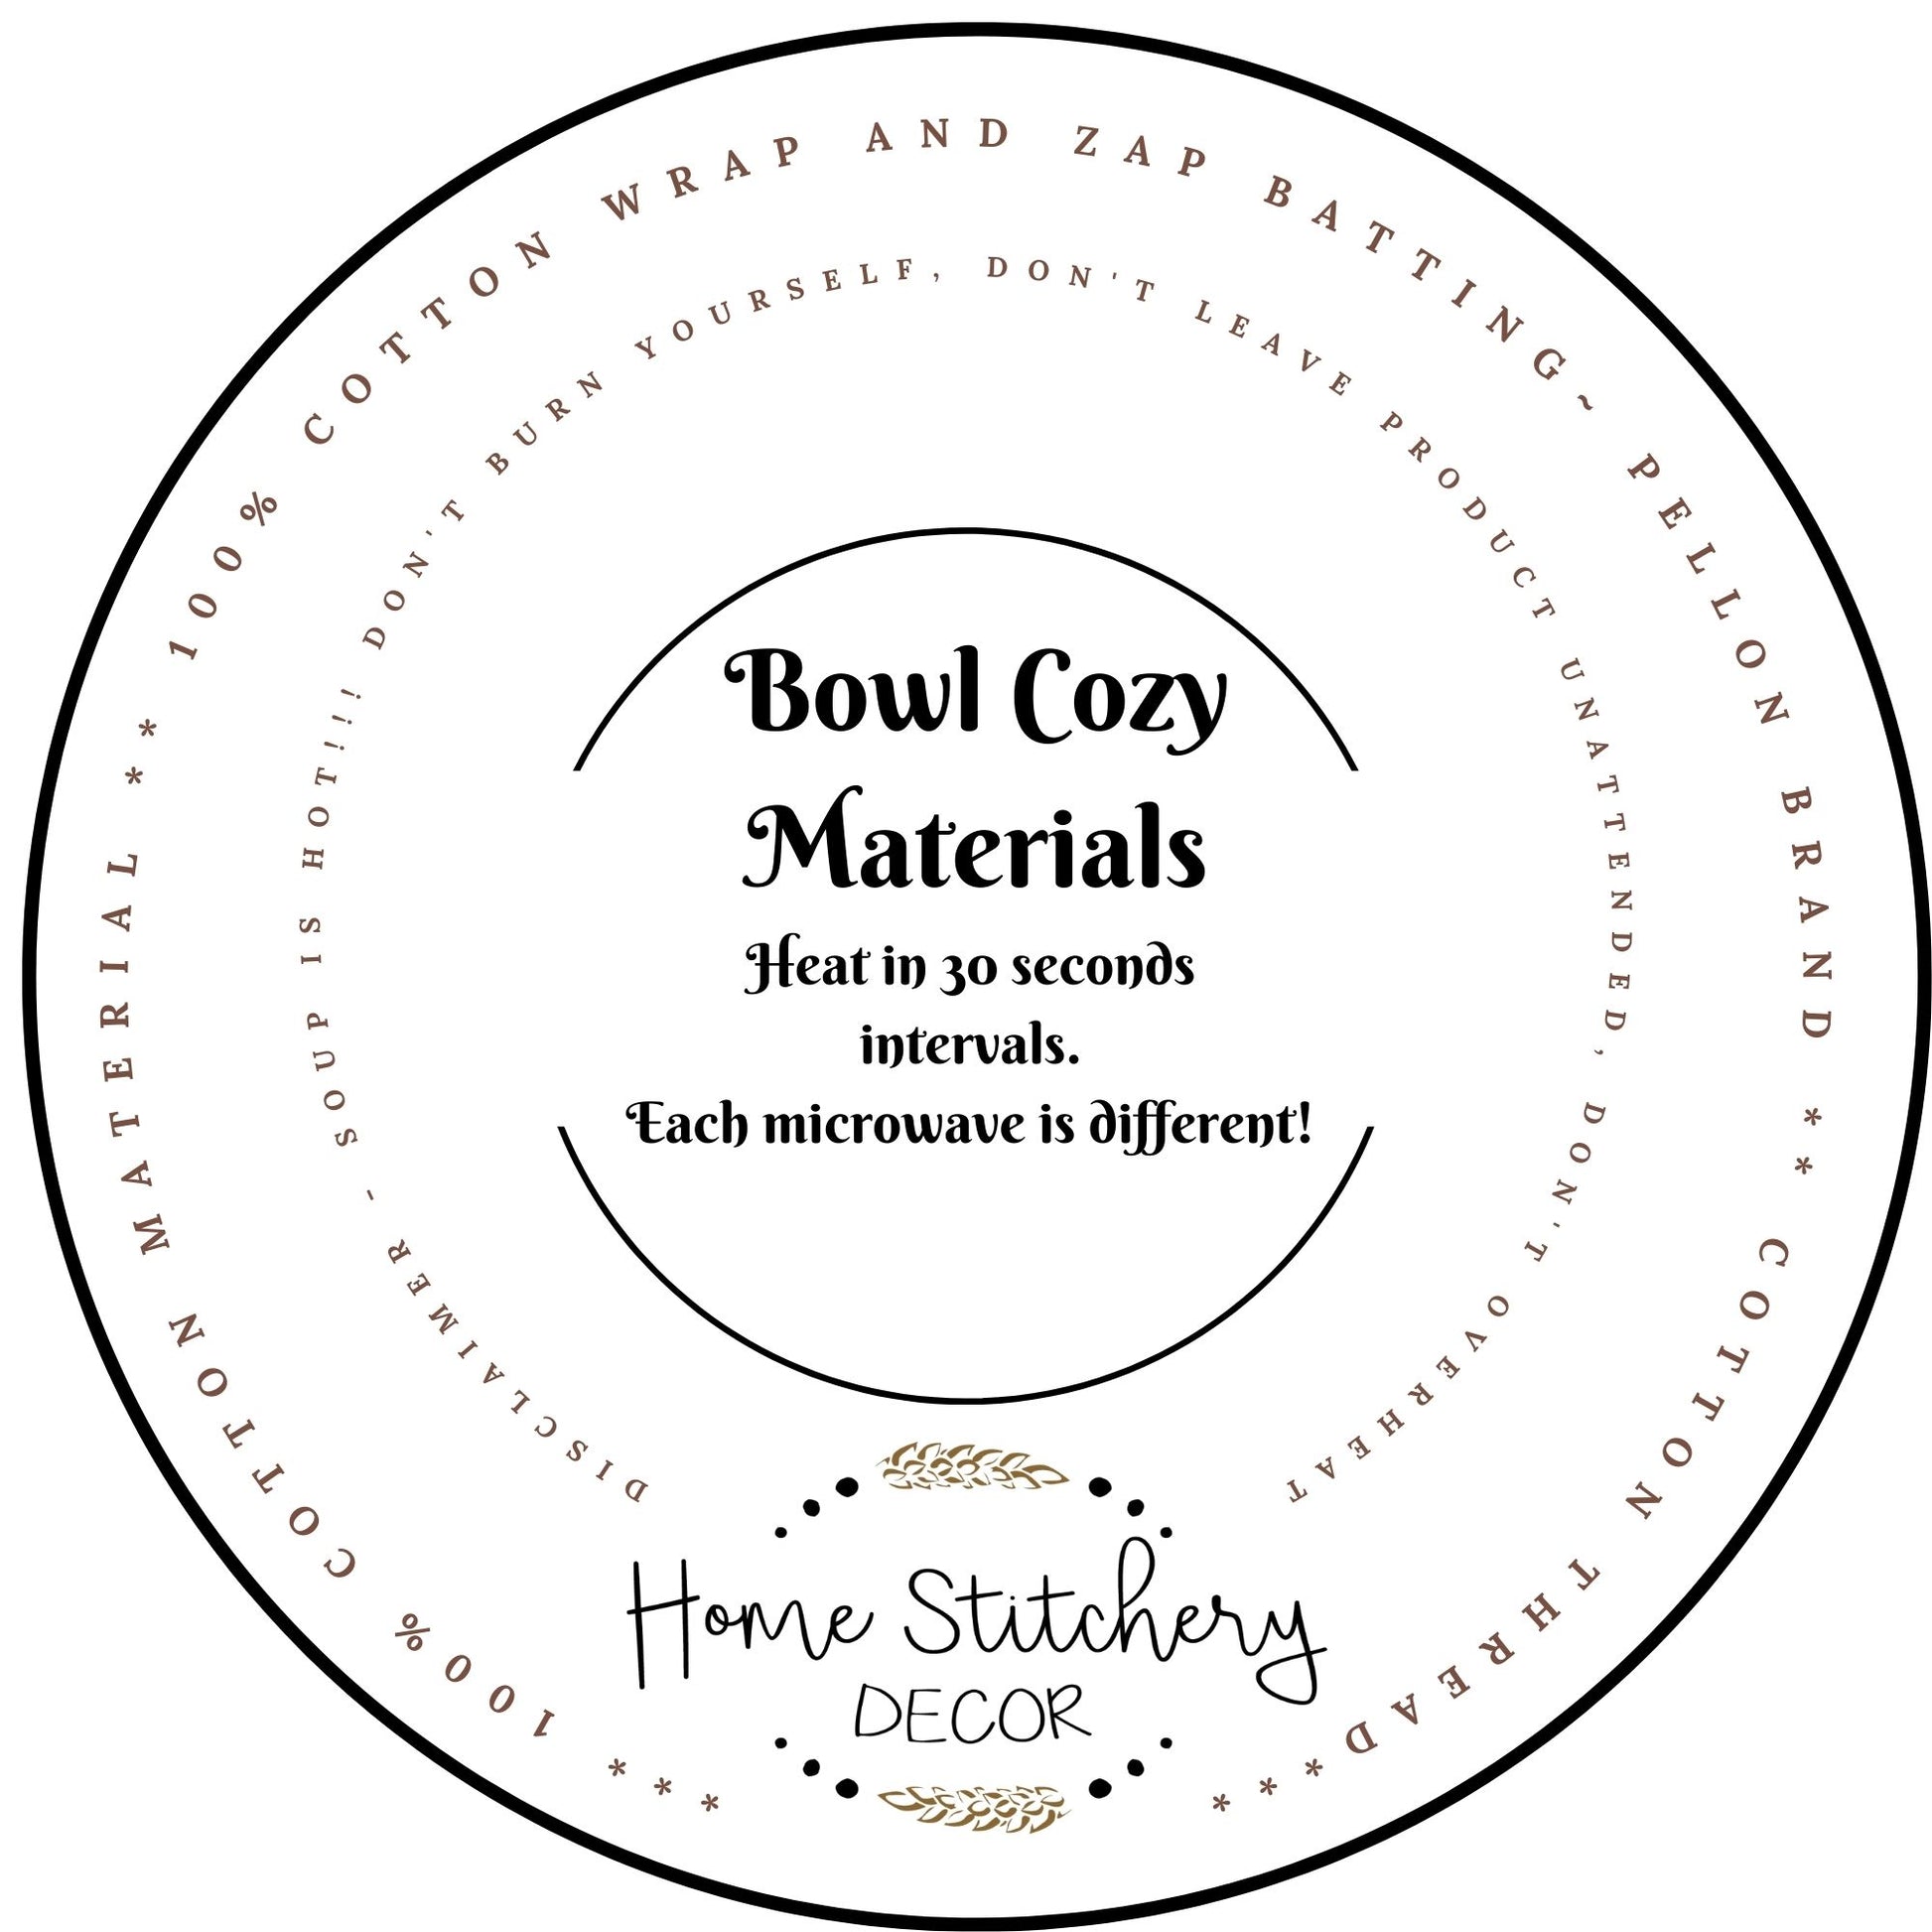 Soup bowl cozy materials. 100% cotton fabric, batting and thread. Never leave your Soup Bowl Cozy unattended while heating. Do not heat over 3 mins and heat in 30 second intervals.